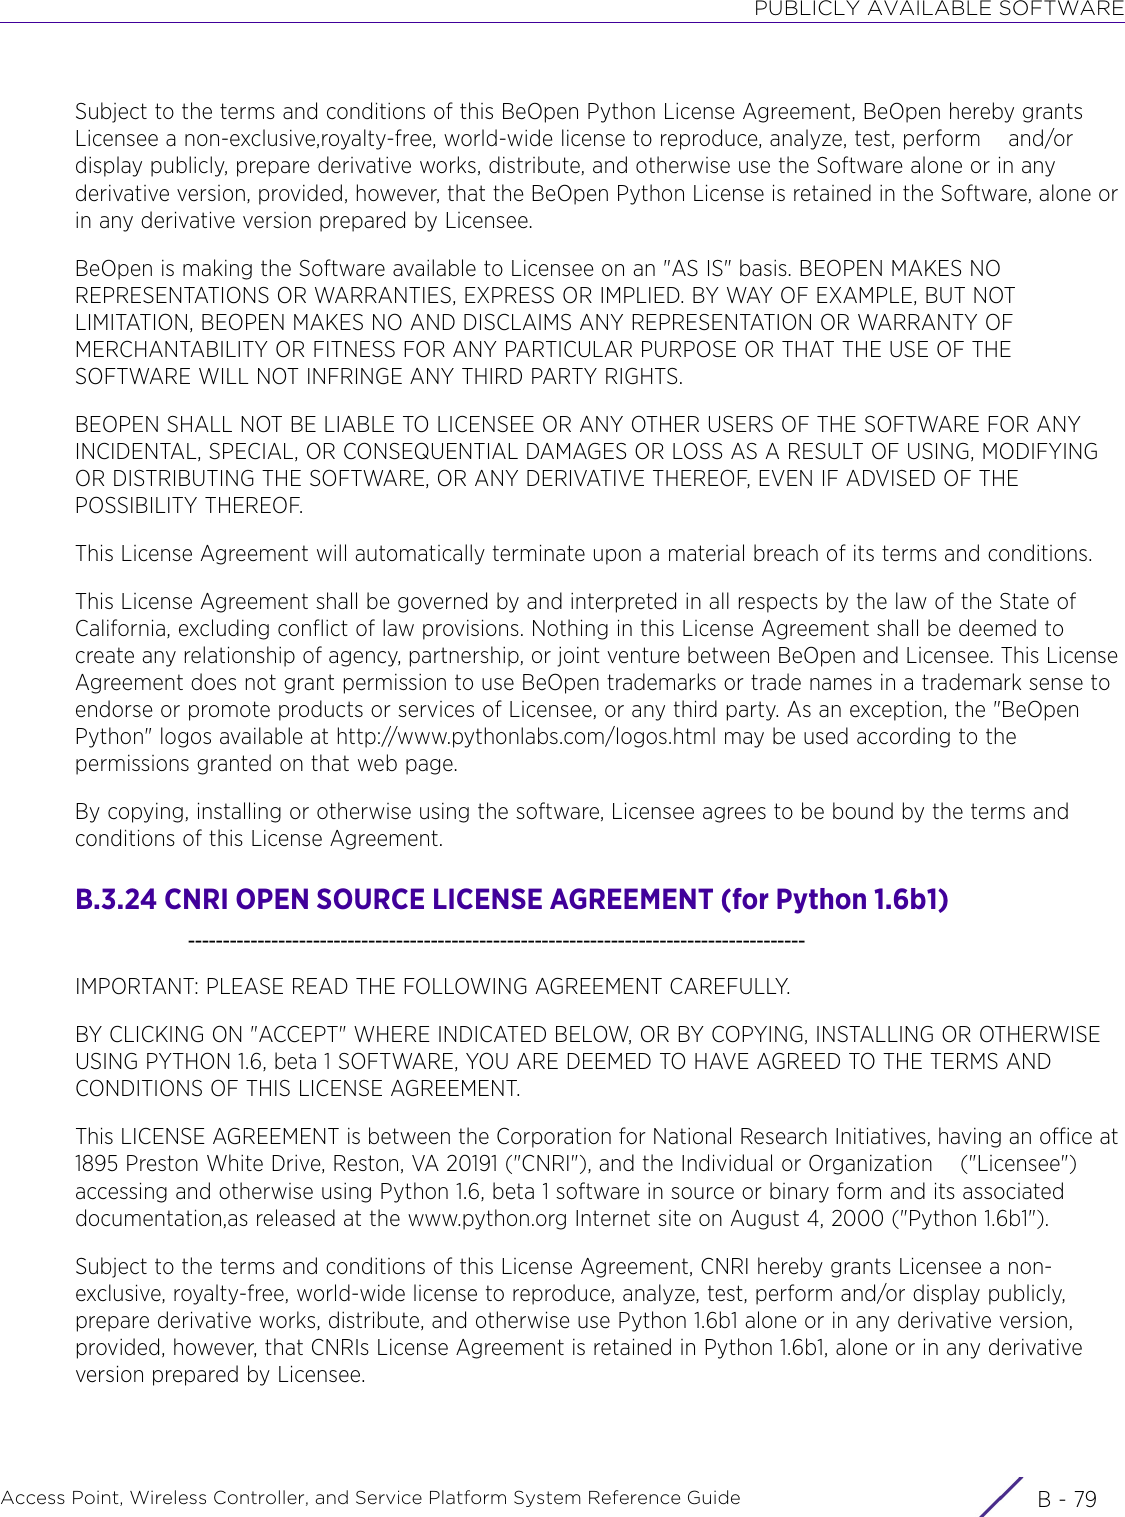 PUBLICLY AVAILABLE SOFTWAREAccess Point, Wireless Controller, and Service Platform System Reference Guide B - 79Subject to the terms and conditions of this BeOpen Python License Agreement, BeOpen hereby grants Licensee a non-exclusive,royalty-free, world-wide license to reproduce, analyze, test, perform    and/or display publicly, prepare derivative works, distribute, and otherwise use the Software alone or in any derivative version, provided, however, that the BeOpen Python License is retained in the Software, alone or in any derivative version prepared by Licensee.BeOpen is making the Software available to Licensee on an &quot;AS IS&quot; basis. BEOPEN MAKES NO REPRESENTATIONS OR WARRANTIES, EXPRESS OR IMPLIED. BY WAY OF EXAMPLE, BUT NOT LIMITATION, BEOPEN MAKES NO AND DISCLAIMS ANY REPRESENTATION OR WARRANTY OF MERCHANTABILITY OR FITNESS FOR ANY PARTICULAR PURPOSE OR THAT THE USE OF THE SOFTWARE WILL NOT INFRINGE ANY THIRD PARTY RIGHTS.BEOPEN SHALL NOT BE LIABLE TO LICENSEE OR ANY OTHER USERS OF THE SOFTWARE FOR ANY INCIDENTAL, SPECIAL, OR CONSEQUENTIAL DAMAGES OR LOSS AS A RESULT OF USING, MODIFYING OR DISTRIBUTING THE SOFTWARE, OR ANY DERIVATIVE THEREOF, EVEN IF ADVISED OF THE POSSIBILITY THEREOF.This License Agreement will automatically terminate upon a material breach of its terms and conditions.This License Agreement shall be governed by and interpreted in all respects by the law of the State of California, excluding conflict of law provisions. Nothing in this License Agreement shall be deemed to     create any relationship of agency, partnership, or joint venture between BeOpen and Licensee. This License Agreement does not grant permission to use BeOpen trademarks or trade names in a trademark sense to endorse or promote products or services of Licensee, or any third party. As an exception, the &quot;BeOpen Python&quot; logos available at http://www.pythonlabs.com/logos.html may be used according to the permissions granted on that web page.By copying, installing or otherwise using the software, Licensee agrees to be bound by the terms and conditions of this License Agreement.B.3.24 CNRI OPEN SOURCE LICENSE AGREEMENT (for Python 1.6b1)    -----------------------------------------------------------------------------------------IMPORTANT: PLEASE READ THE FOLLOWING AGREEMENT CAREFULLY.BY CLICKING ON &quot;ACCEPT&quot; WHERE INDICATED BELOW, OR BY COPYING, INSTALLING OR OTHERWISE USING PYTHON 1.6, beta 1 SOFTWARE, YOU ARE DEEMED TO HAVE AGREED TO THE TERMS AND CONDITIONS OF THIS LICENSE AGREEMENT.This LICENSE AGREEMENT is between the Corporation for National Research Initiatives, having an office at 1895 Preston White Drive, Reston, VA 20191 (&quot;CNRI&quot;), and the Individual or Organization    (&quot;Licensee&quot;) accessing and otherwise using Python 1.6, beta 1 software in source or binary form and its associated documentation,as released at the www.python.org Internet site on August 4, 2000 (&quot;Python 1.6b1&quot;).Subject to the terms and conditions of this License Agreement, CNRI hereby grants Licensee a non-exclusive, royalty-free, world-wide license to reproduce, analyze, test, perform and/or display publicly, prepare derivative works, distribute, and otherwise use Python 1.6b1 alone or in any derivative version, provided, however, that CNRIs License Agreement is retained in Python 1.6b1, alone or in any derivative version prepared by Licensee.